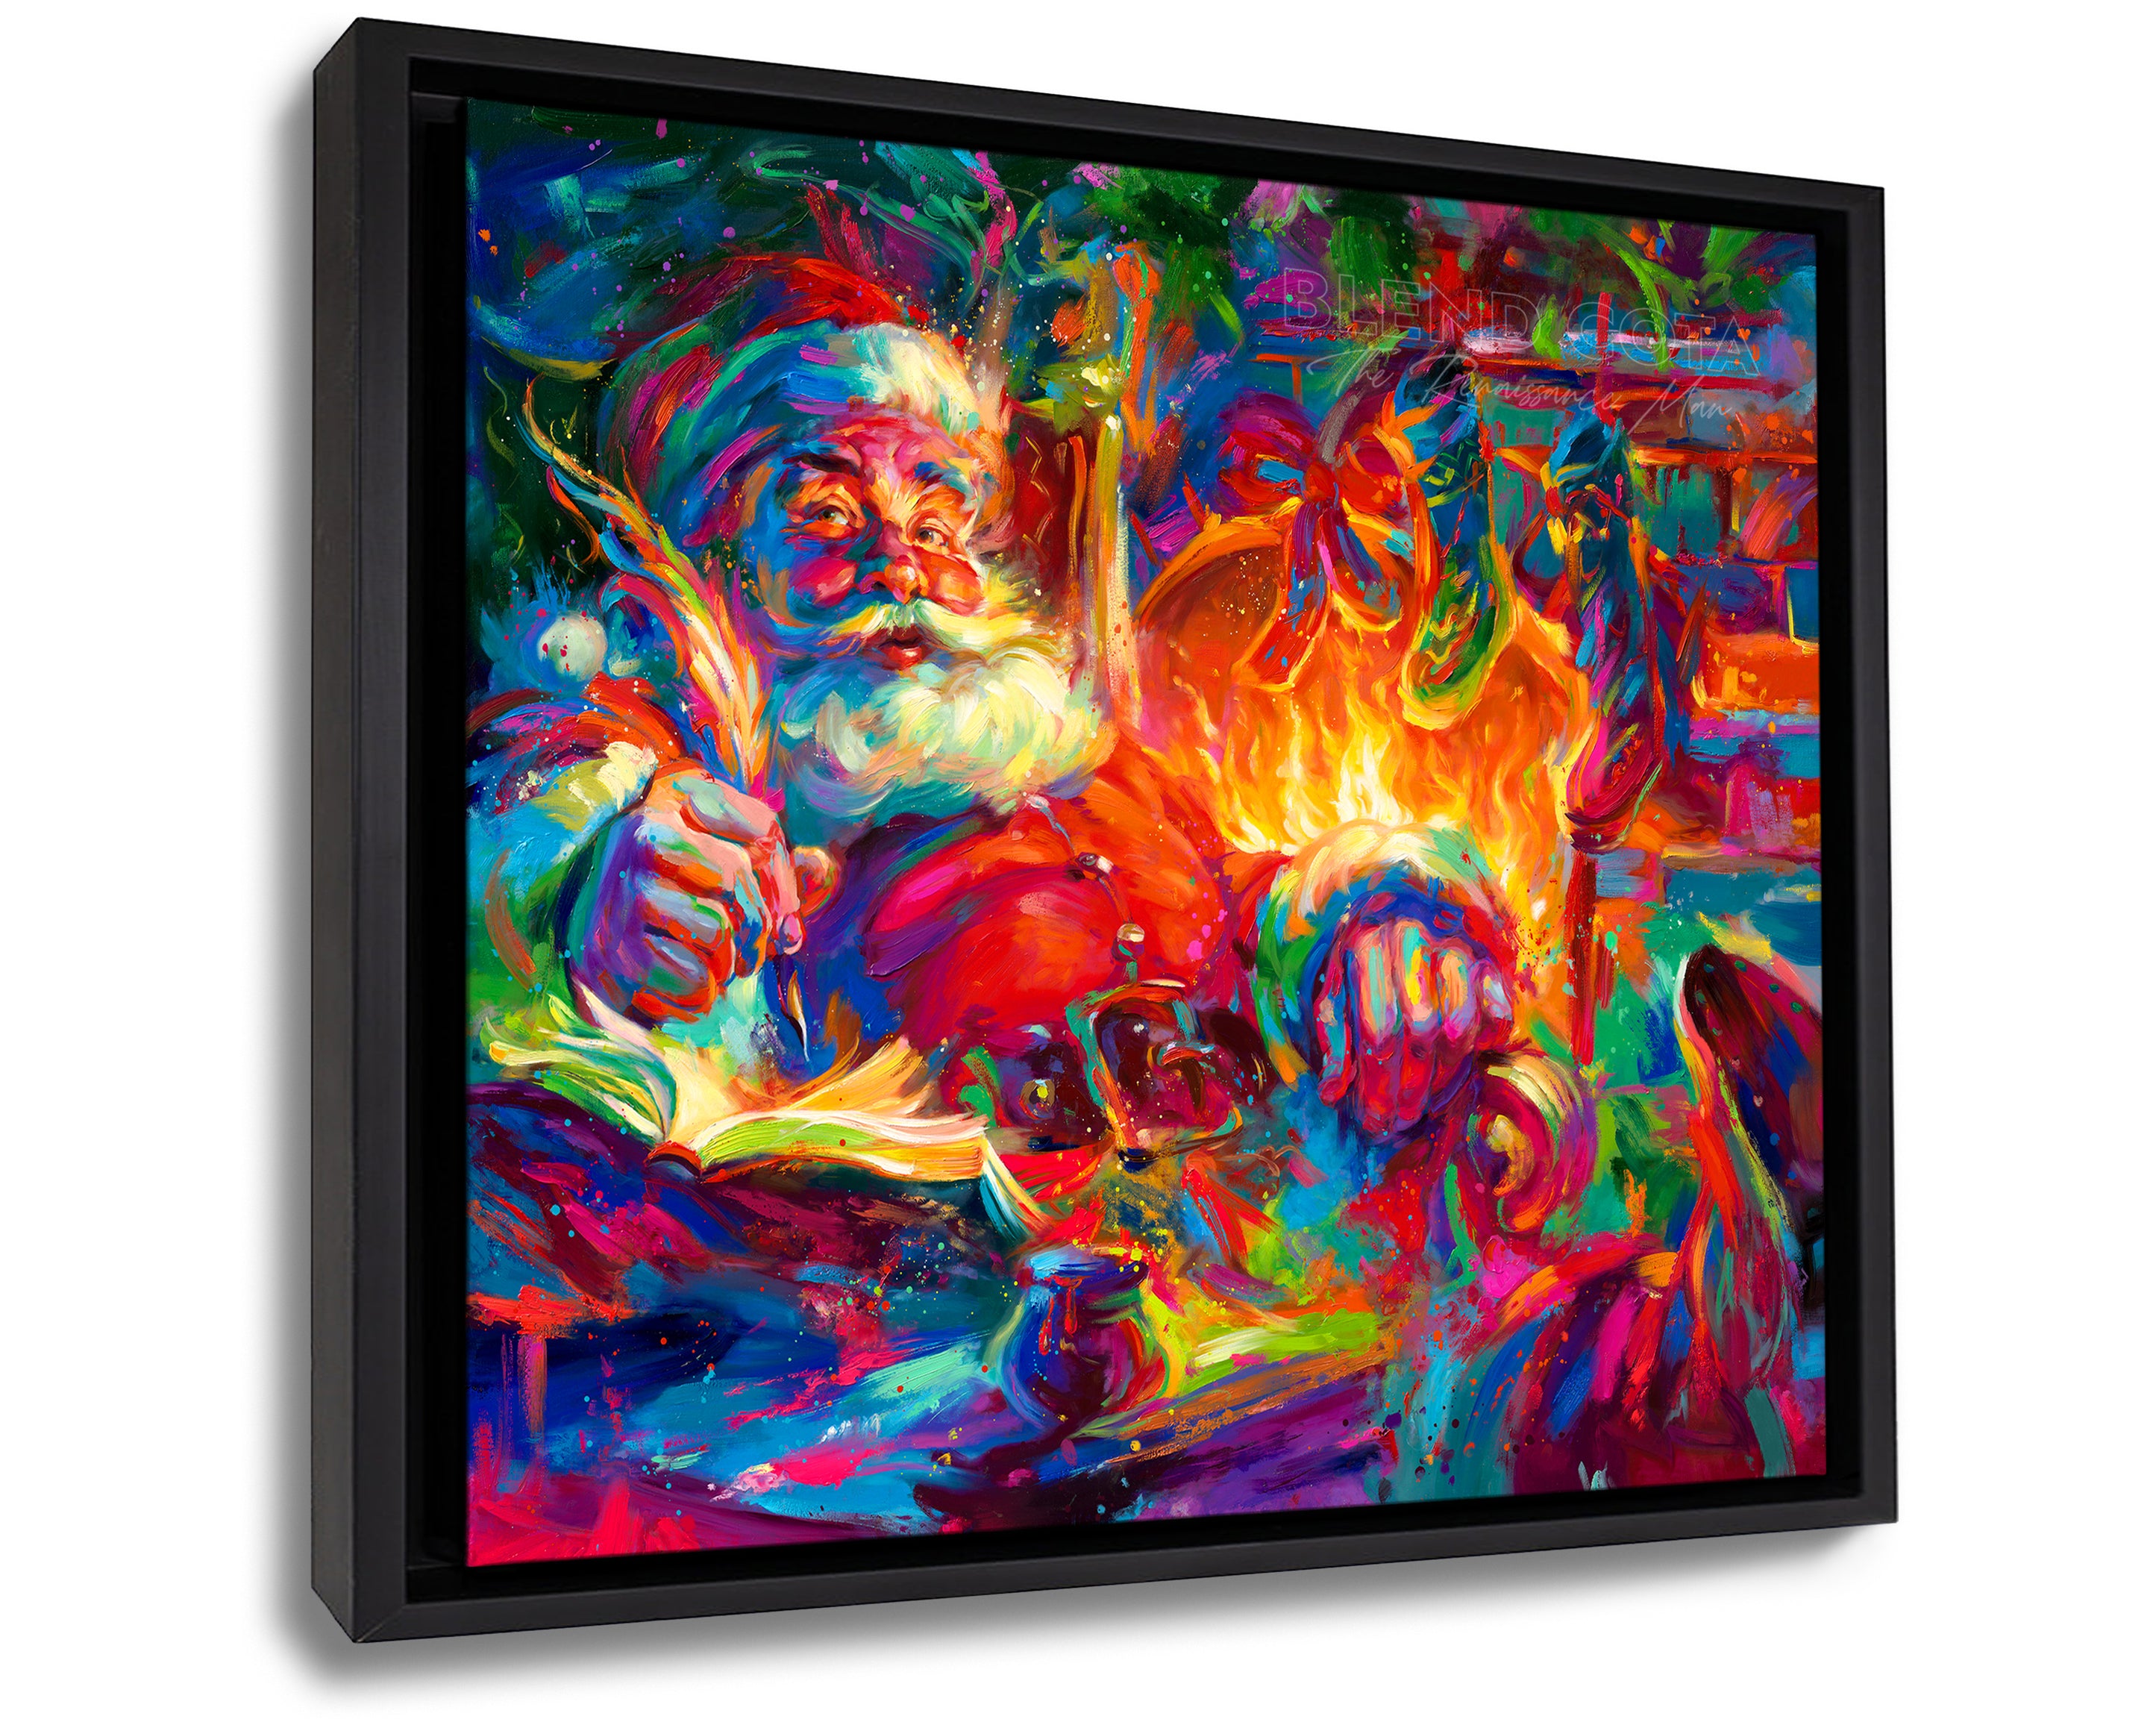 Santa claus painted by Blend Cota Art Print Framed on Canvas from Blend Cota Studios with a Black Frame